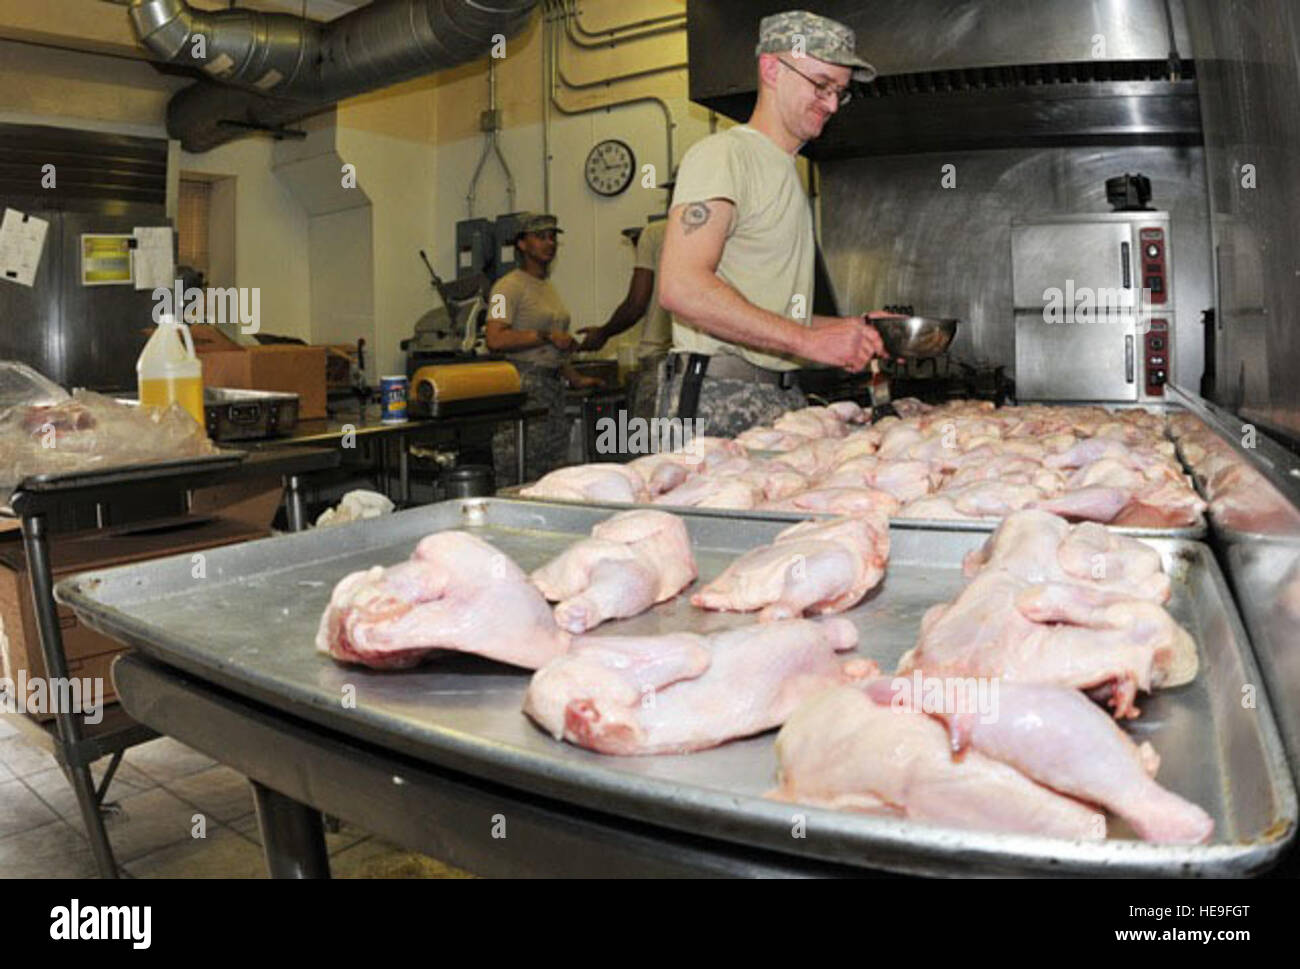 U.S. Army Pfc. Scott Larson, a food services specialist with the 82nd Airborne, preps Cornish game hen for dinner at the dining facility inside the Combined Joint Task Force-82 Joint Operations Center, Feb. 12.  A native of Butte, Neb., Larson and his team mates serve more than 900 meals per day at the dining facility inside of the Combined Joint Task Force-82 Joint Operations Center. During the holidays, the dining facility crew members plan for more elaborate festivities and spend extra hours to prepare those special meals. Stock Photo